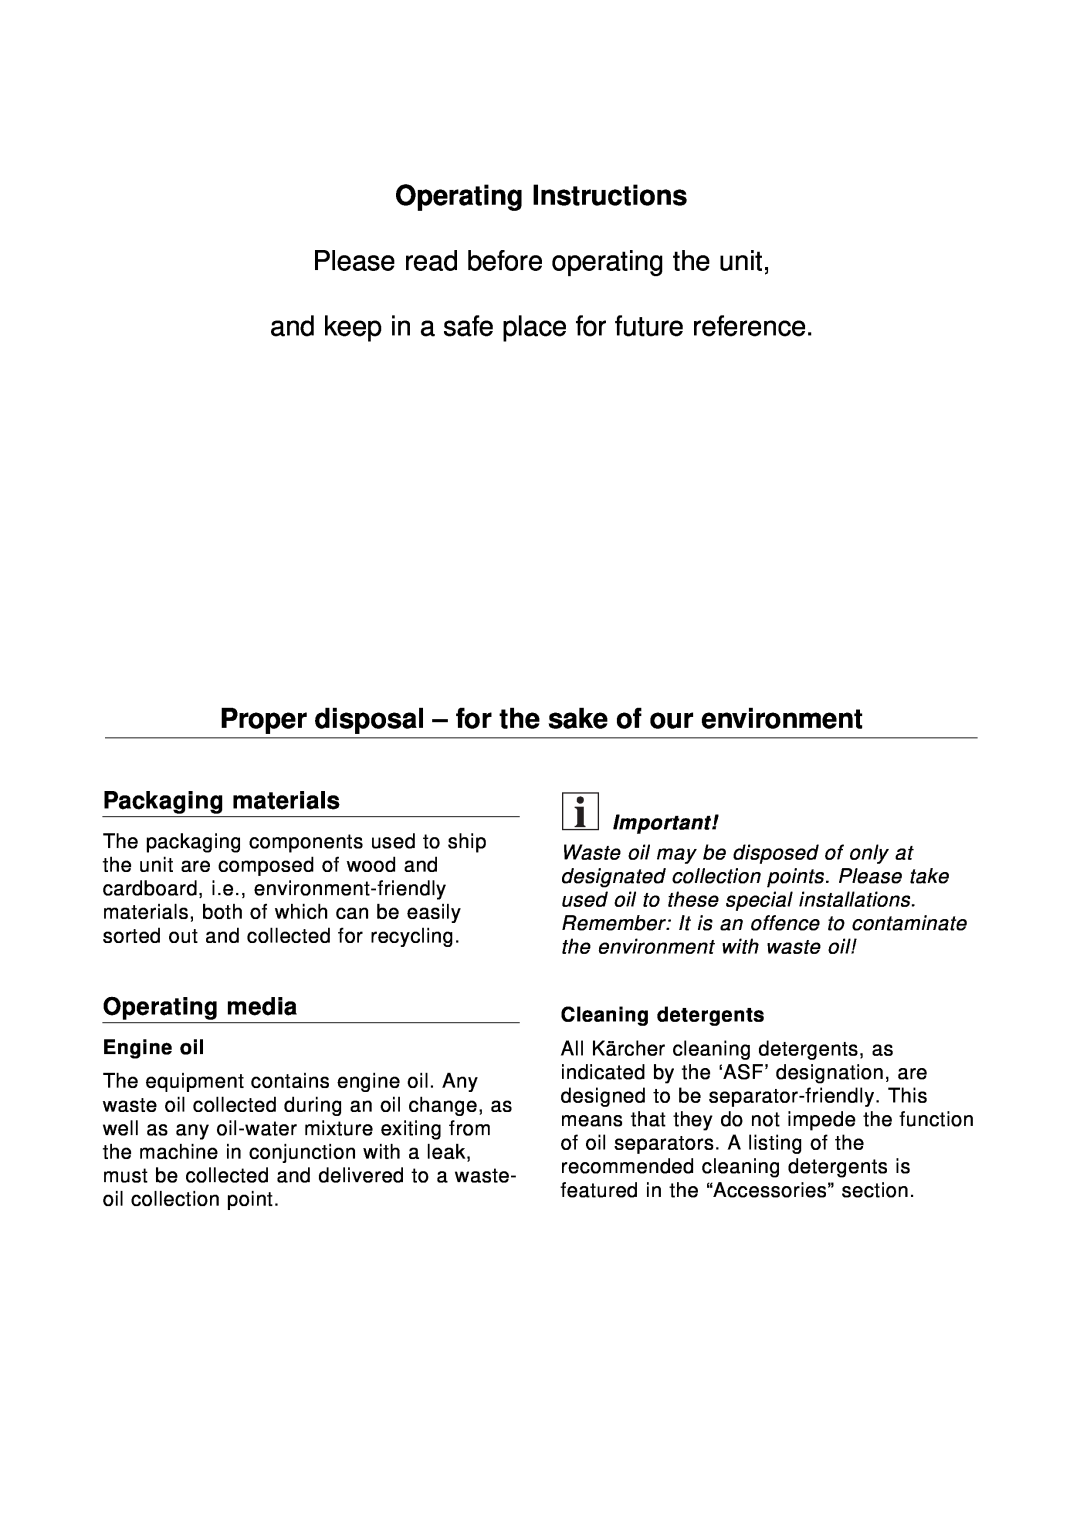 Karcher HD 4000 C Operating Instructions, Proper disposal - for the sake of our environment, Packaging materials 